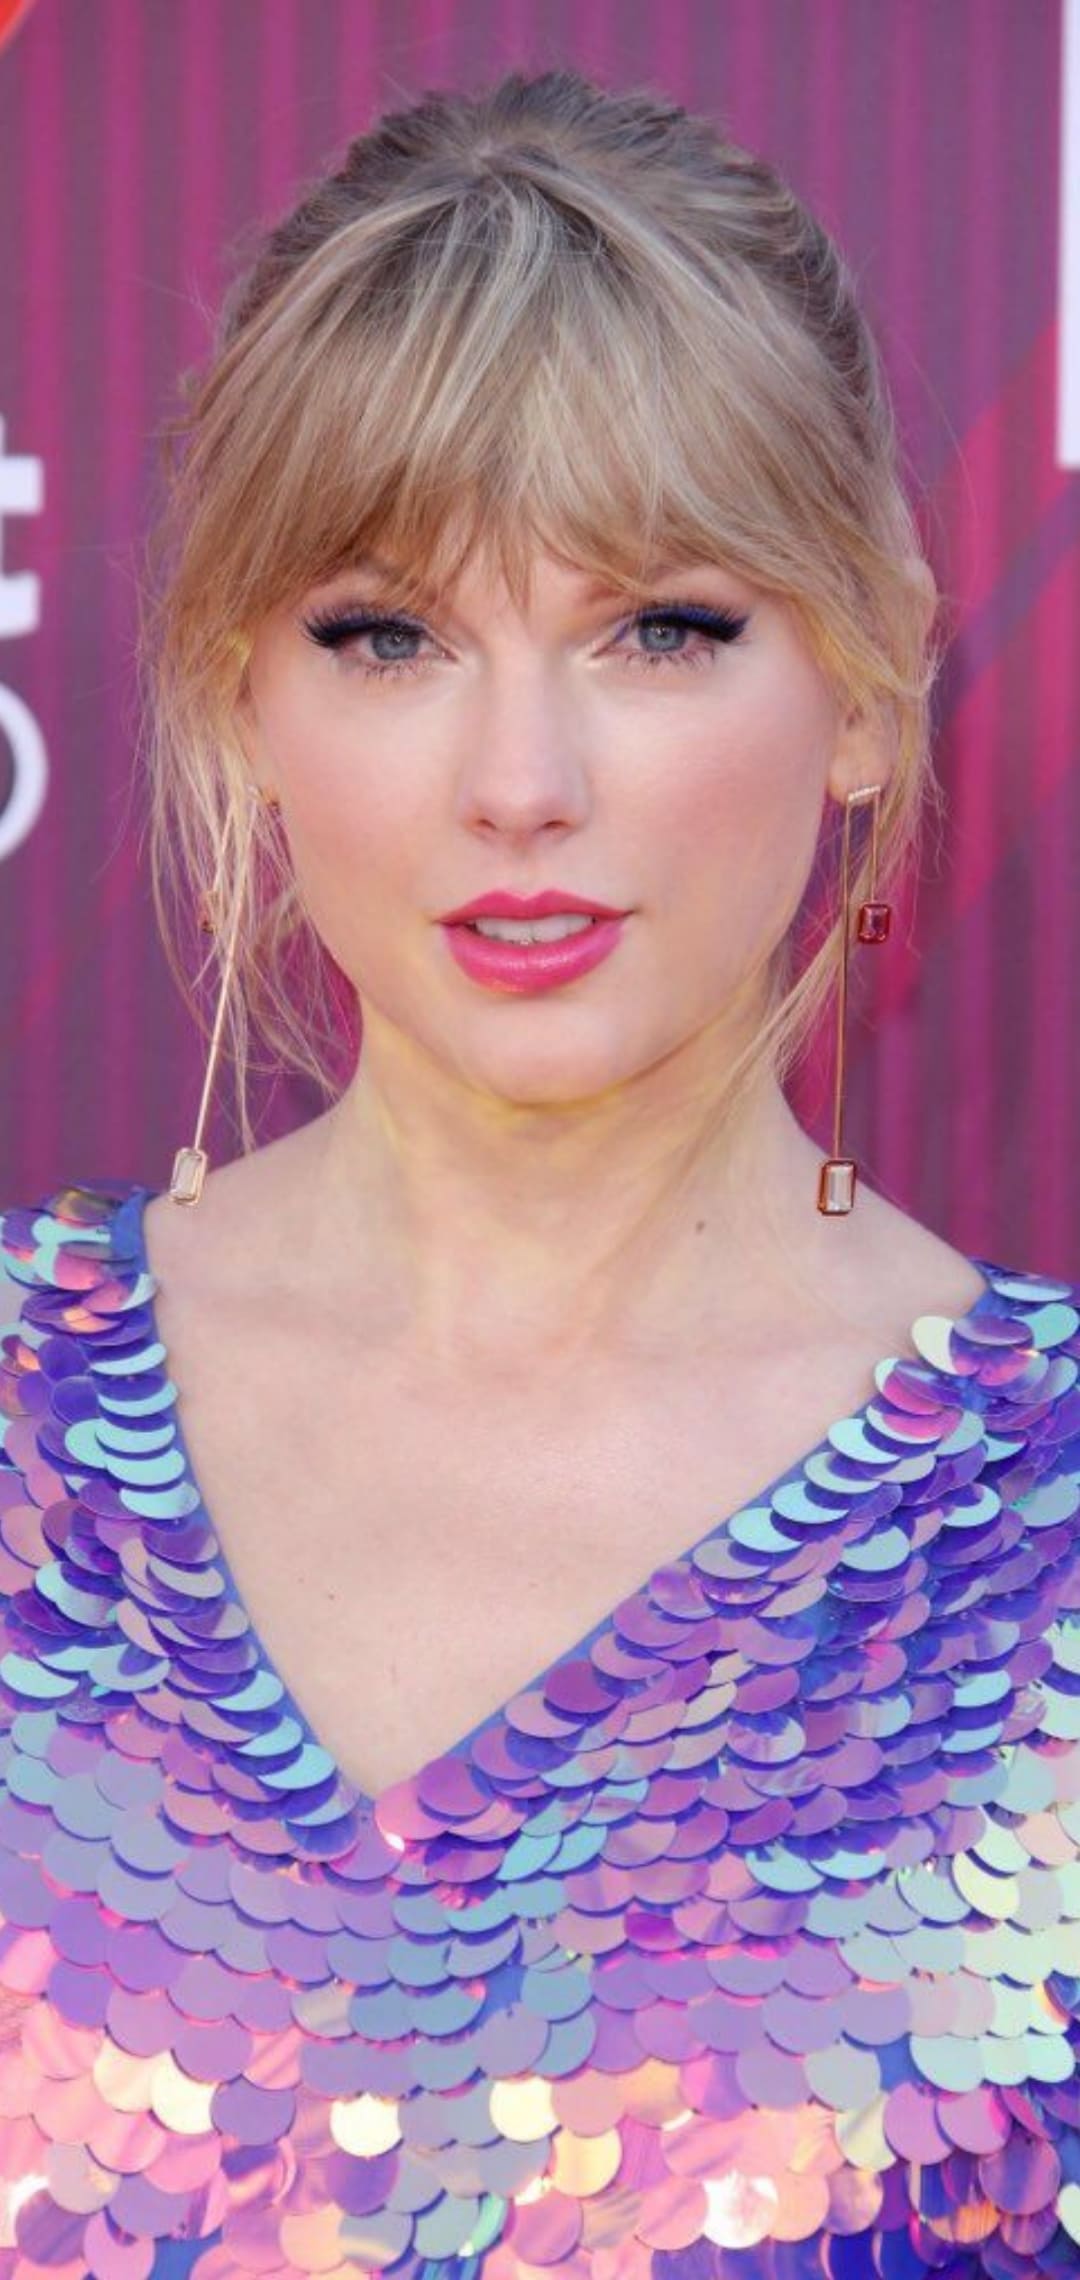 Taylor Swift iPhone Wallpaper with high-resolution 1080x1920 pixel. You can use this wallpaper for your iPhone 5, 6, 7, 8, X, XS, XR backgrounds, Mobile Screensaver, or iPad Lock Screen - Taylor Swift